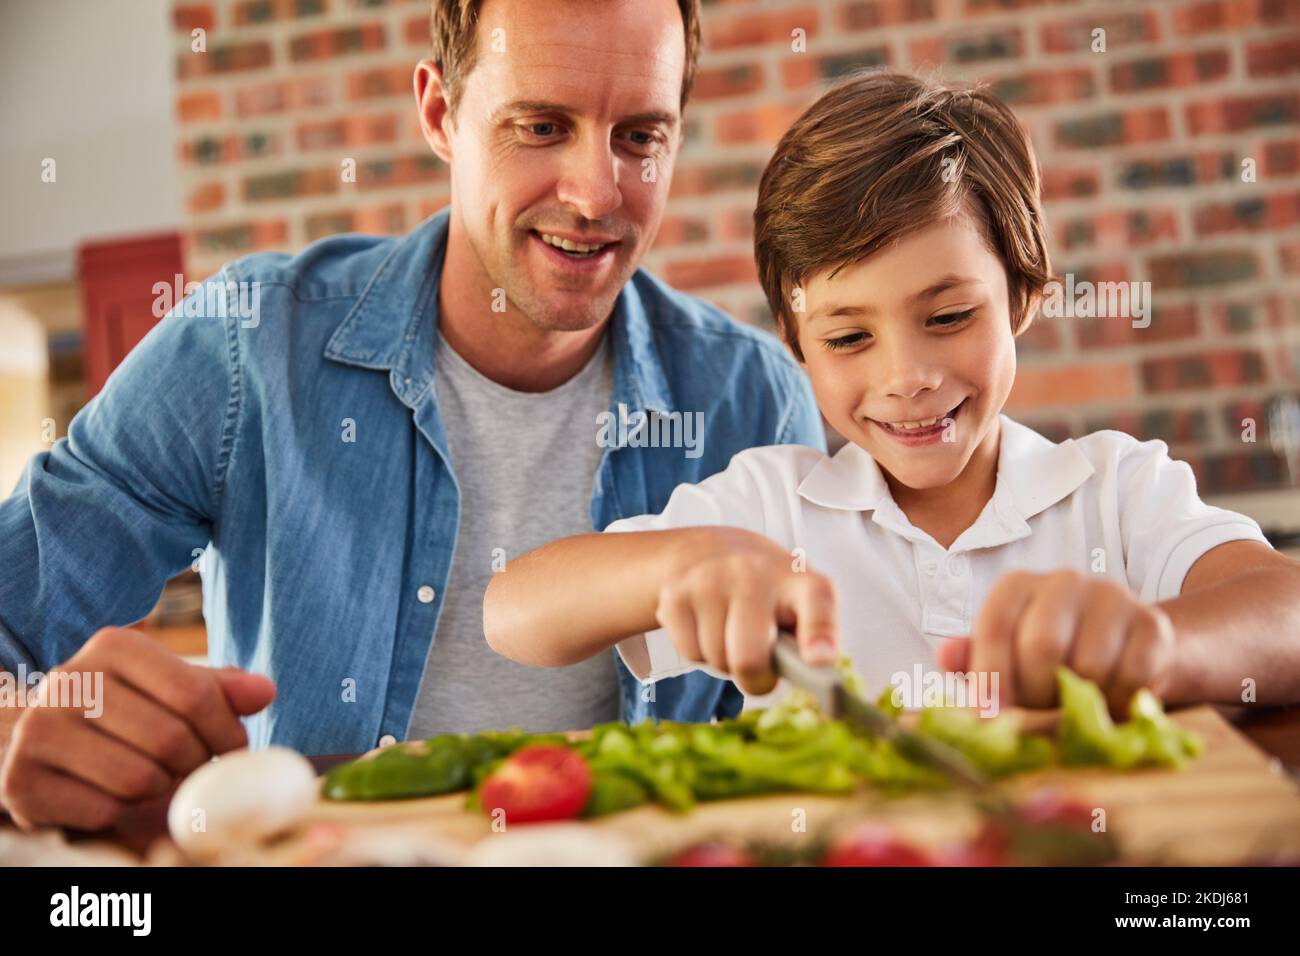 Hes a Masterchef in the making. a father watching his little boy chop vegetables in the kitchen. Stock Photo